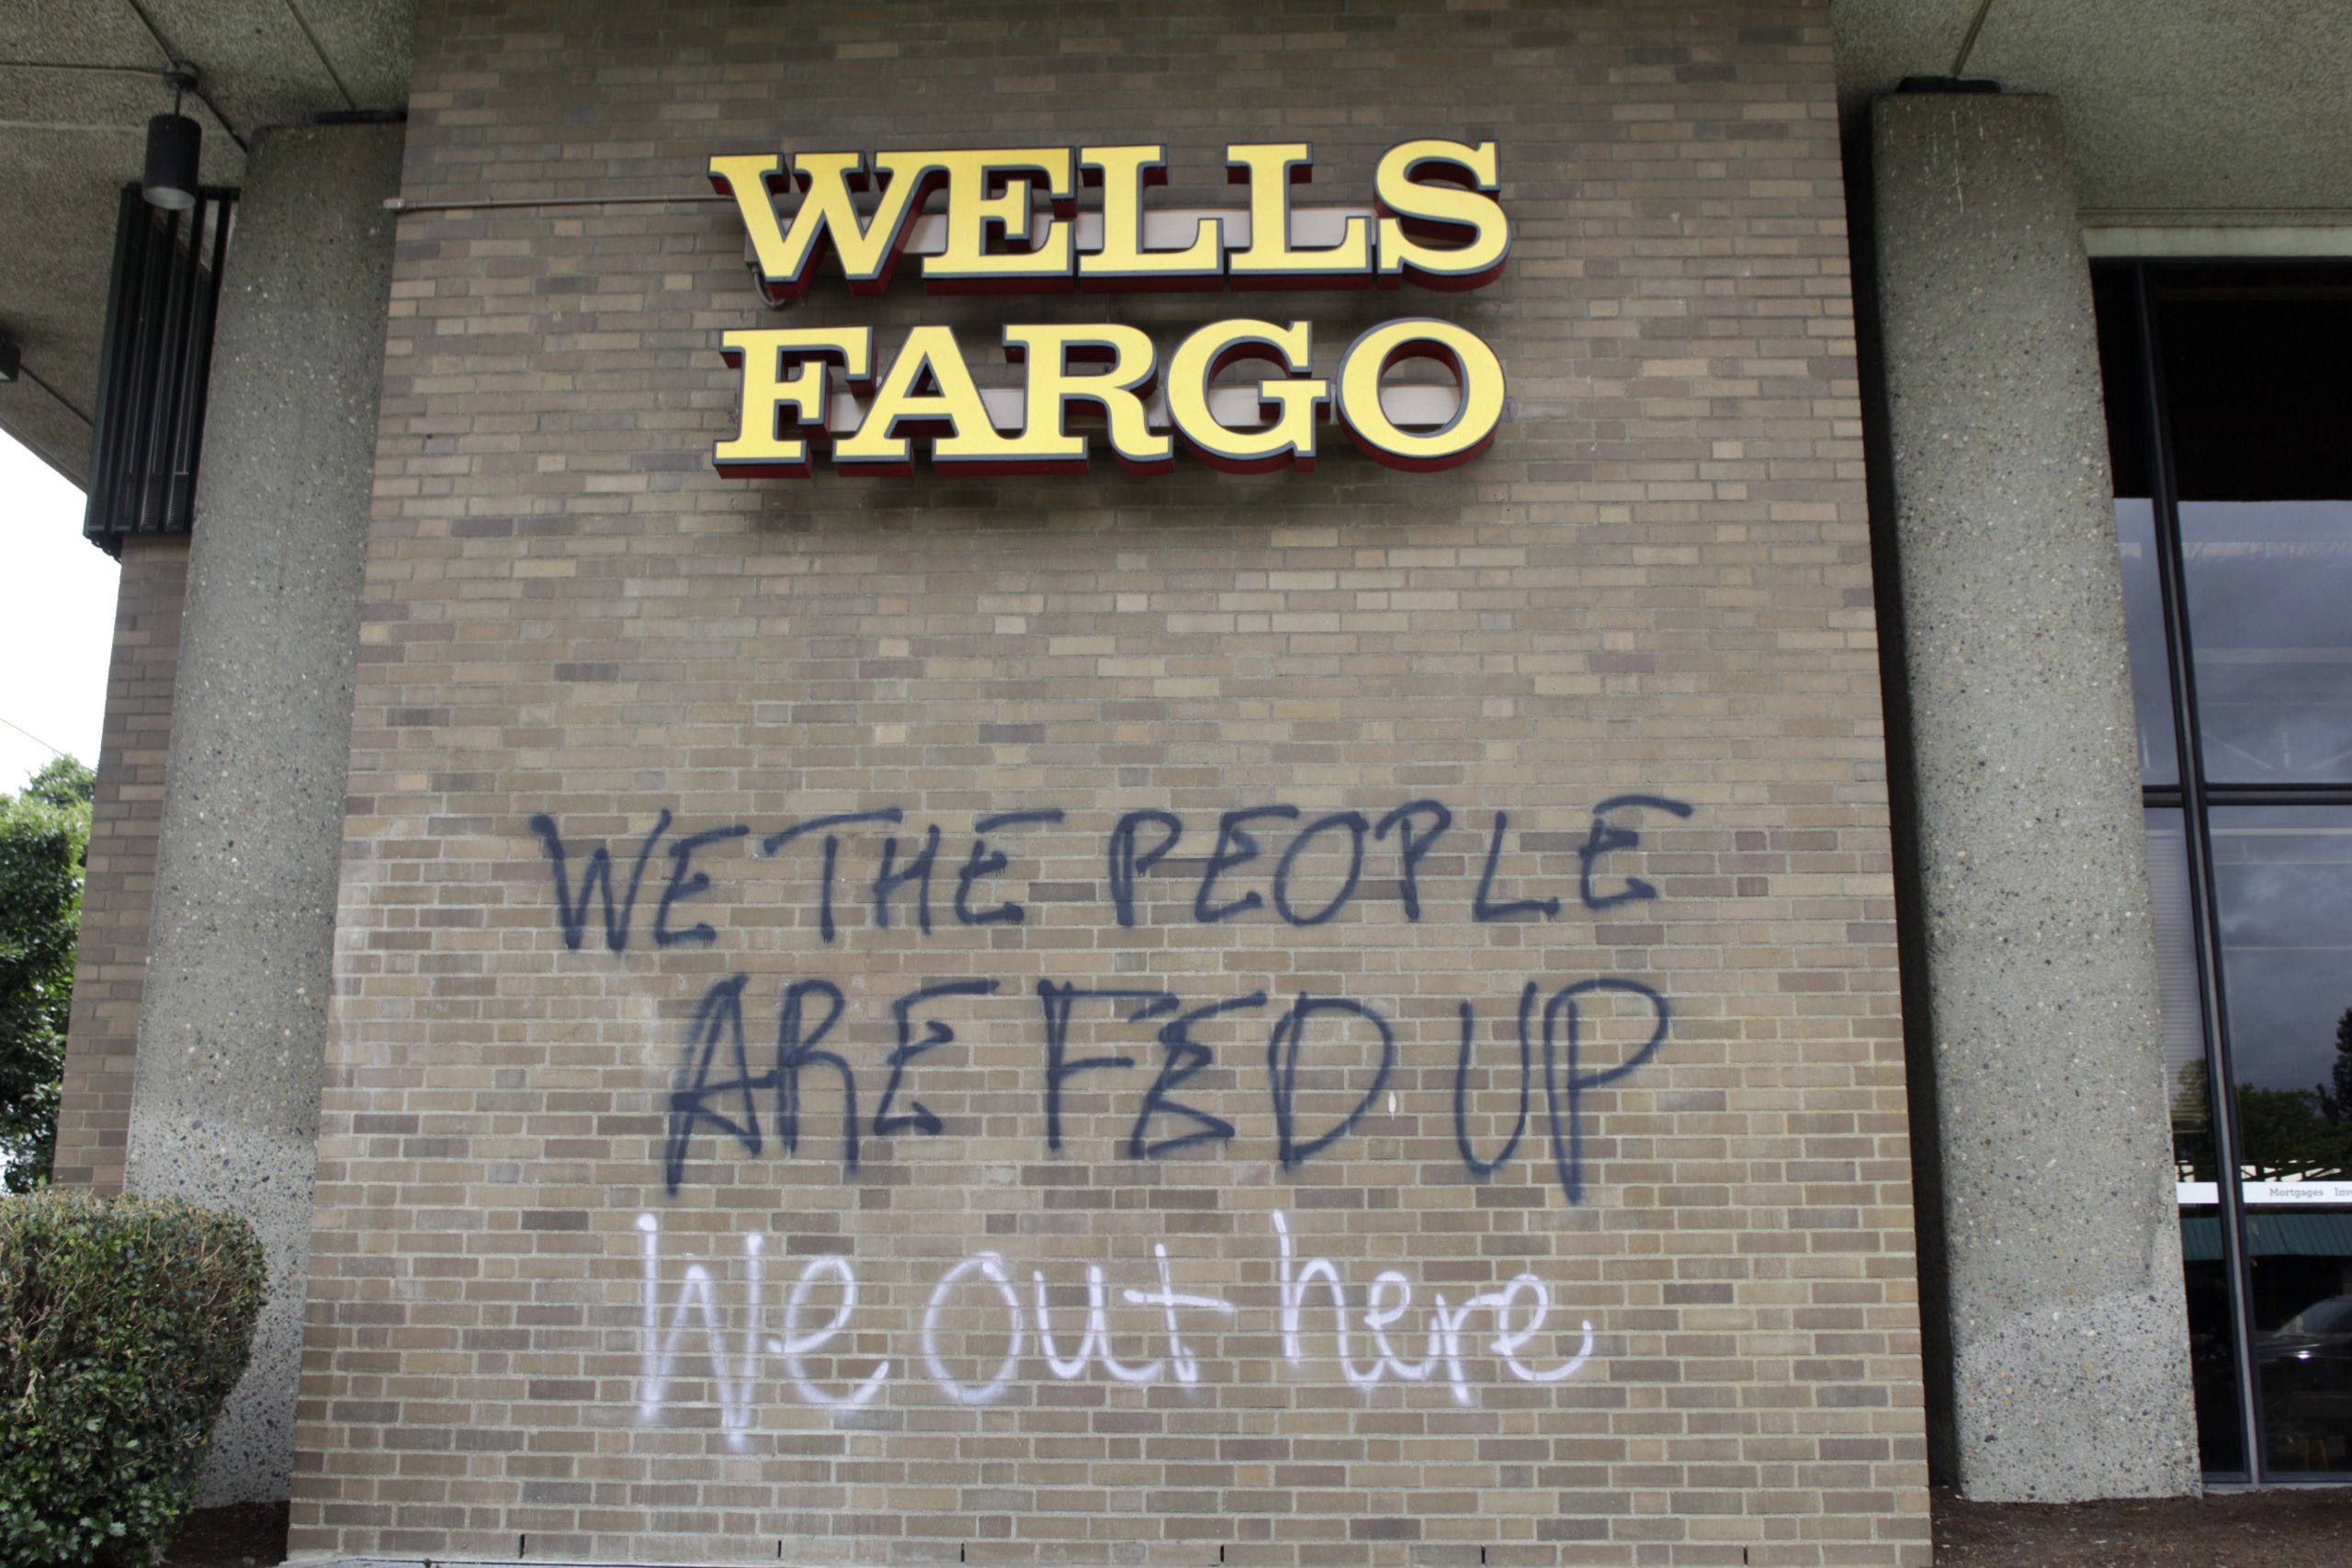 Graffiti covers the exterior of a Wells Fargo bank on Wednesday, July 1, 2020, in a historically Black neighborhood in Portland, Ore., that has been the scene of violent clashes with police in recent days. Thousands of protesters in the liberal and predominantly white city have taken to the streets peacefully every day for more than five weeks to decry police brutality, but recent violence by smaller groups is creating a deep schism in the protest movement. As demonstrations enter...